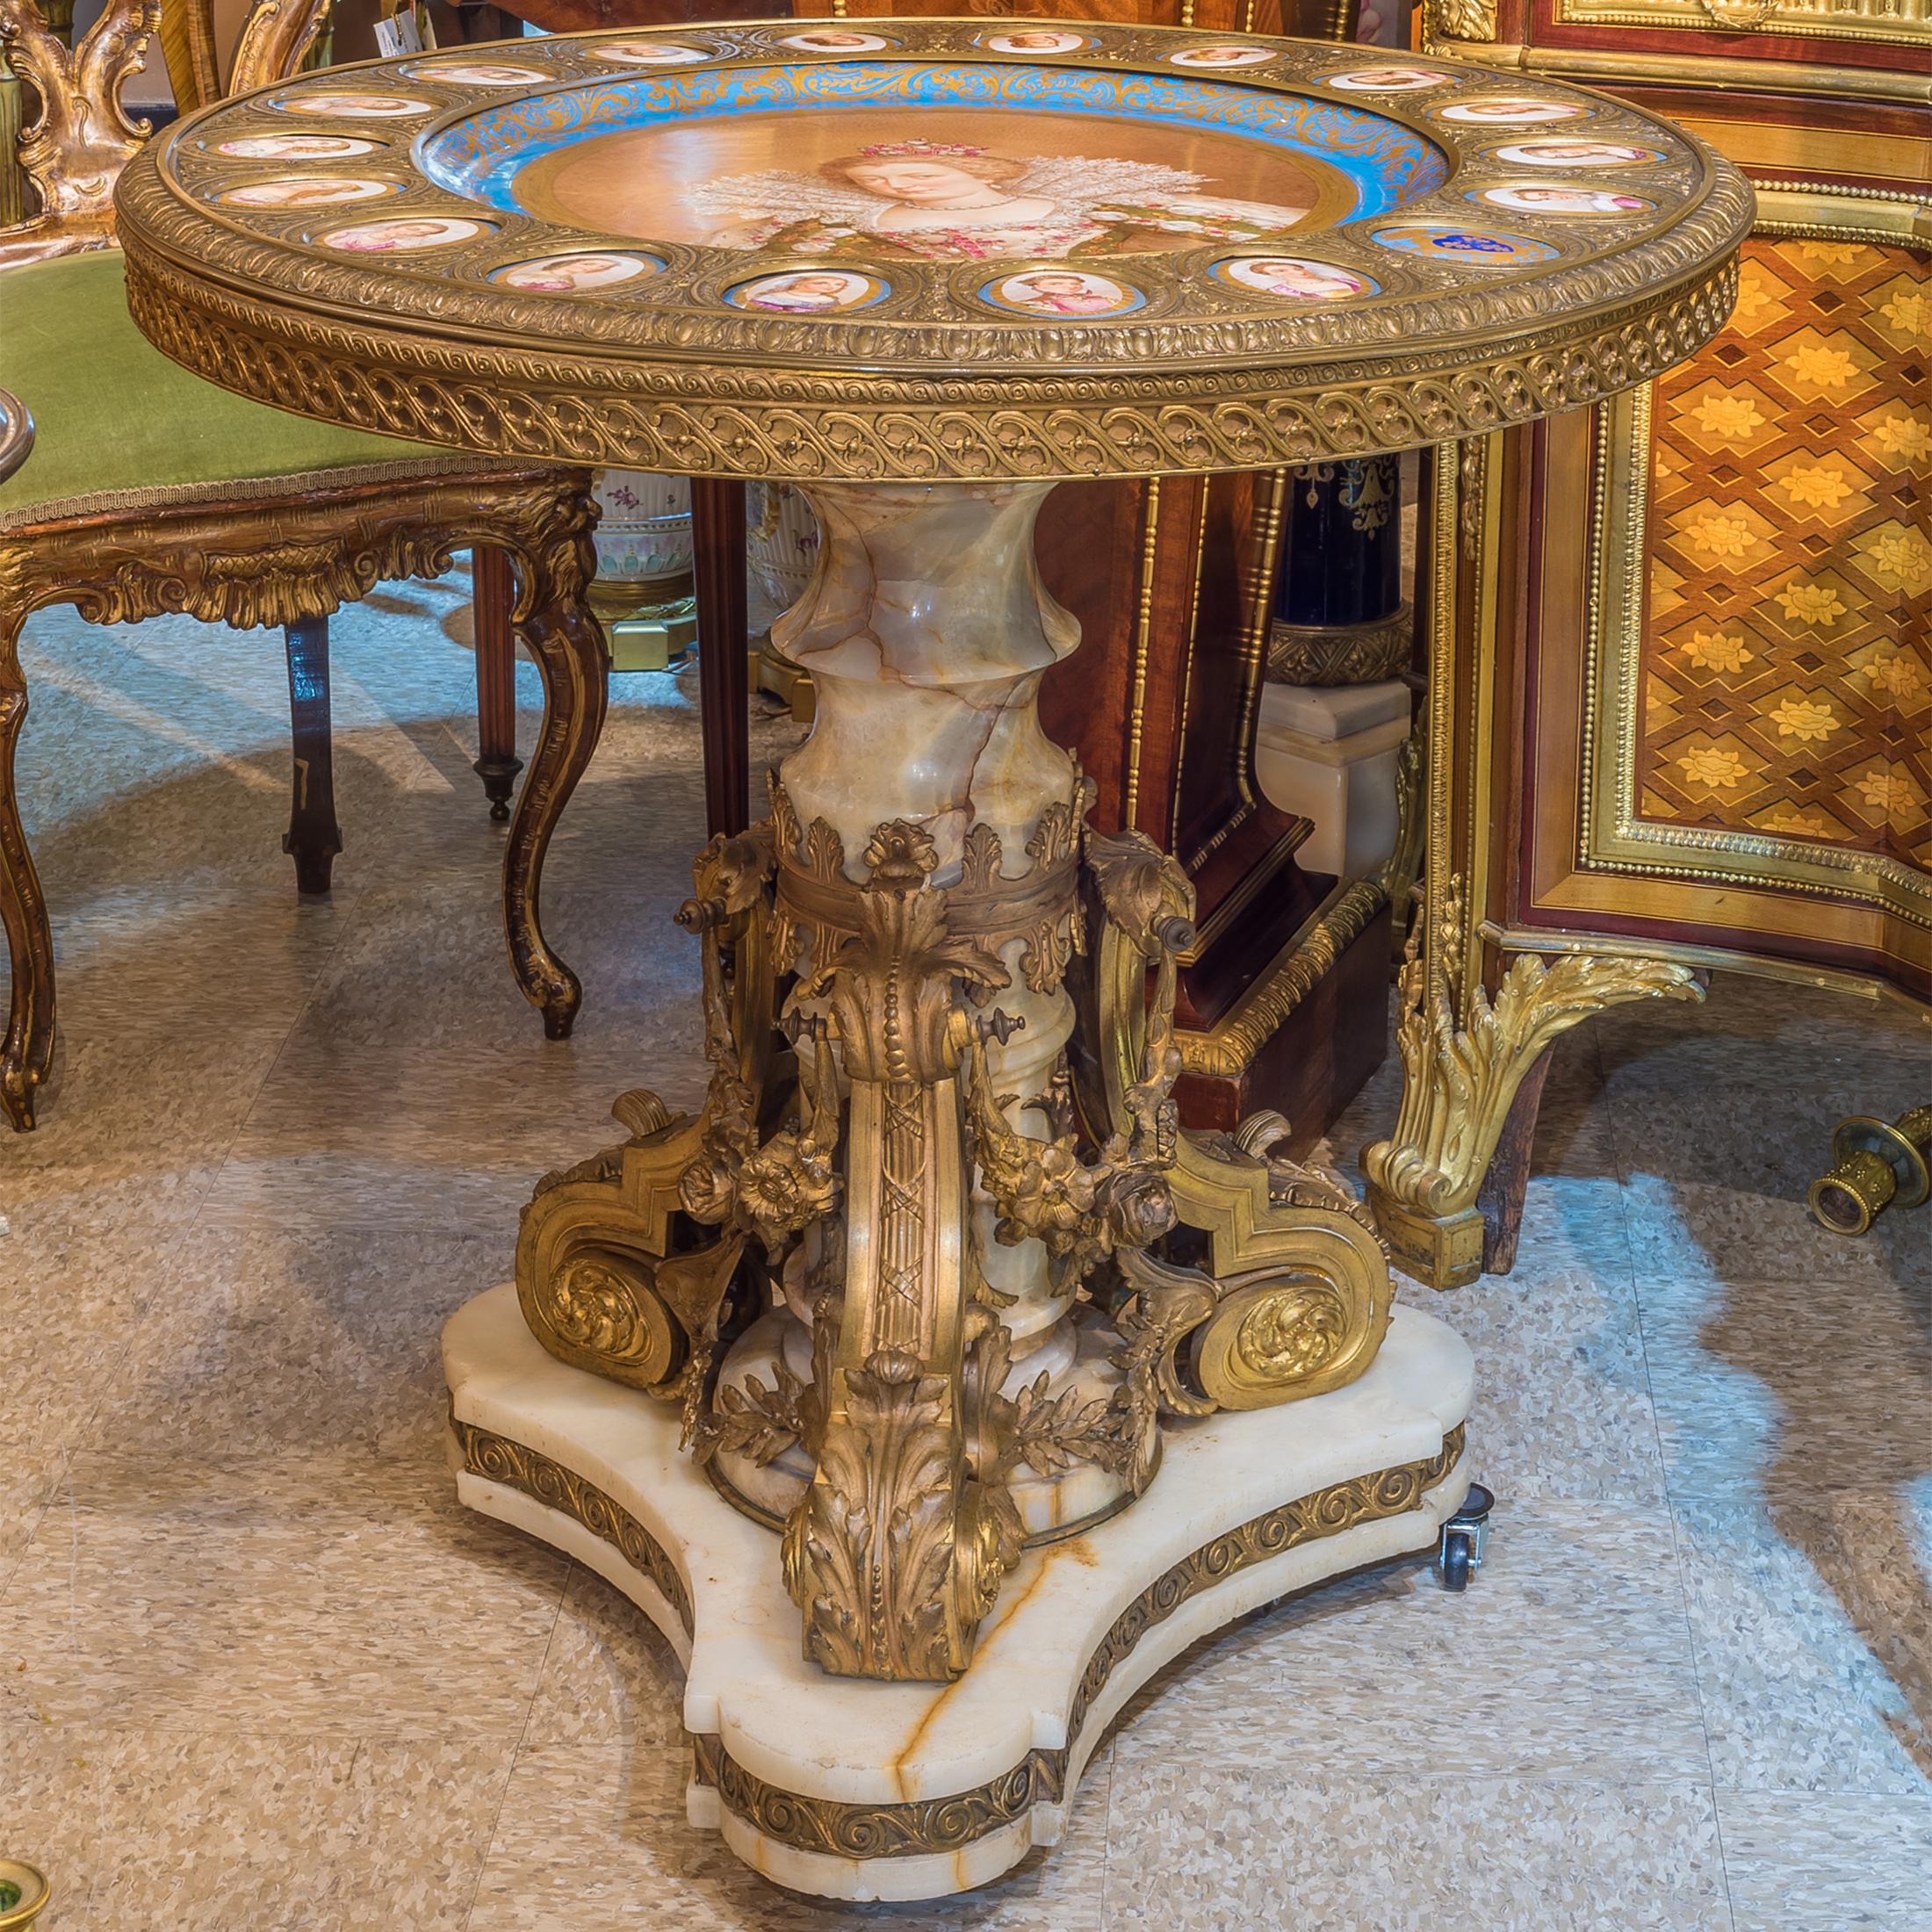 Gilt Napoleon III Ormolu-Mounted Onyx Center Table with Sèvres-style Porcelain Plaque For Sale